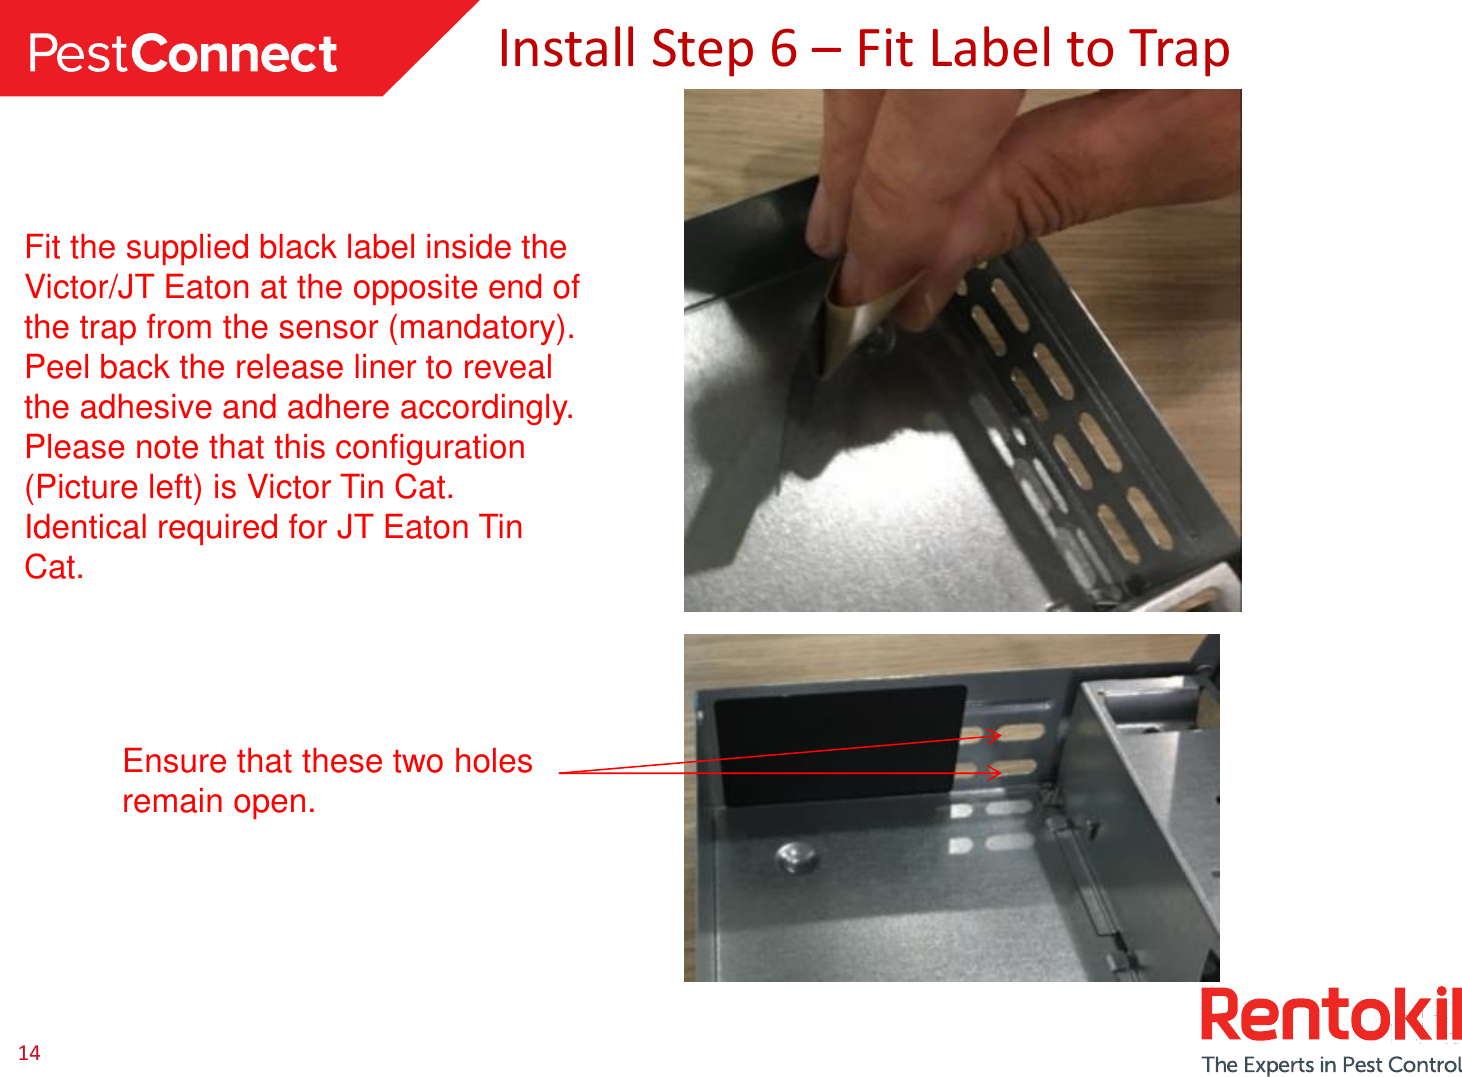 14 Install Step 6 – Fit Label to Trap Fit the supplied black label inside the Victor/JT Eaton at the opposite end of the trap from the sensor (mandatory). Peel back the release liner to reveal the adhesive and adhere accordingly. Please note that this configuration (Picture left) is Victor Tin Cat. Identical required for JT Eaton Tin Cat.  Ensure that these two holes remain open. 